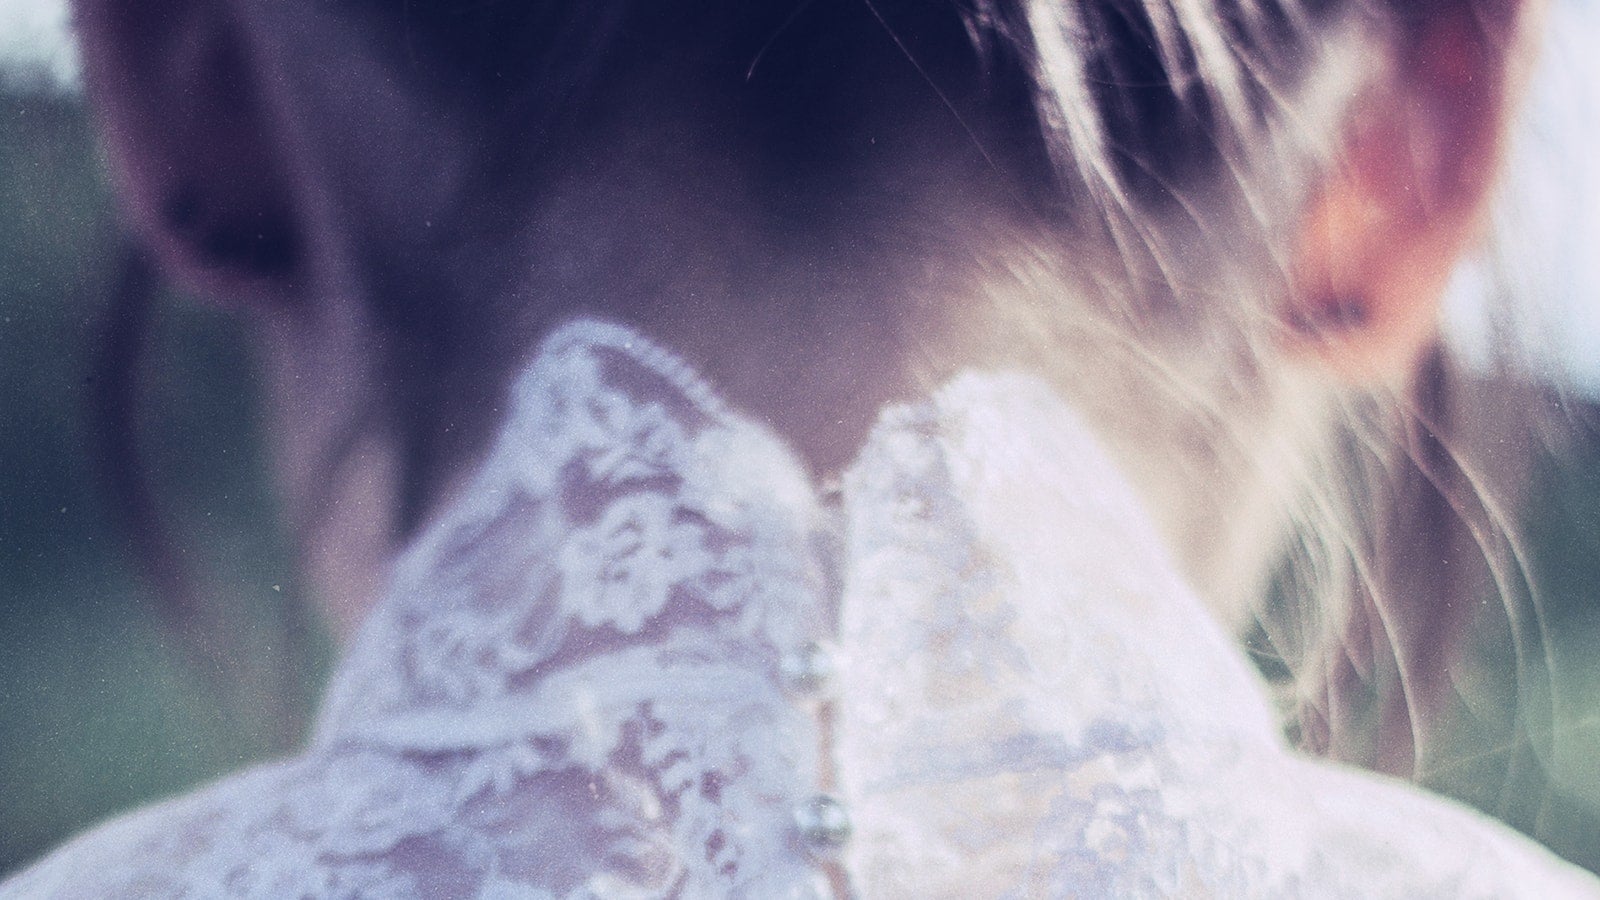 Image of the back of a woman's head in white dress, from the cover of The Woman in White